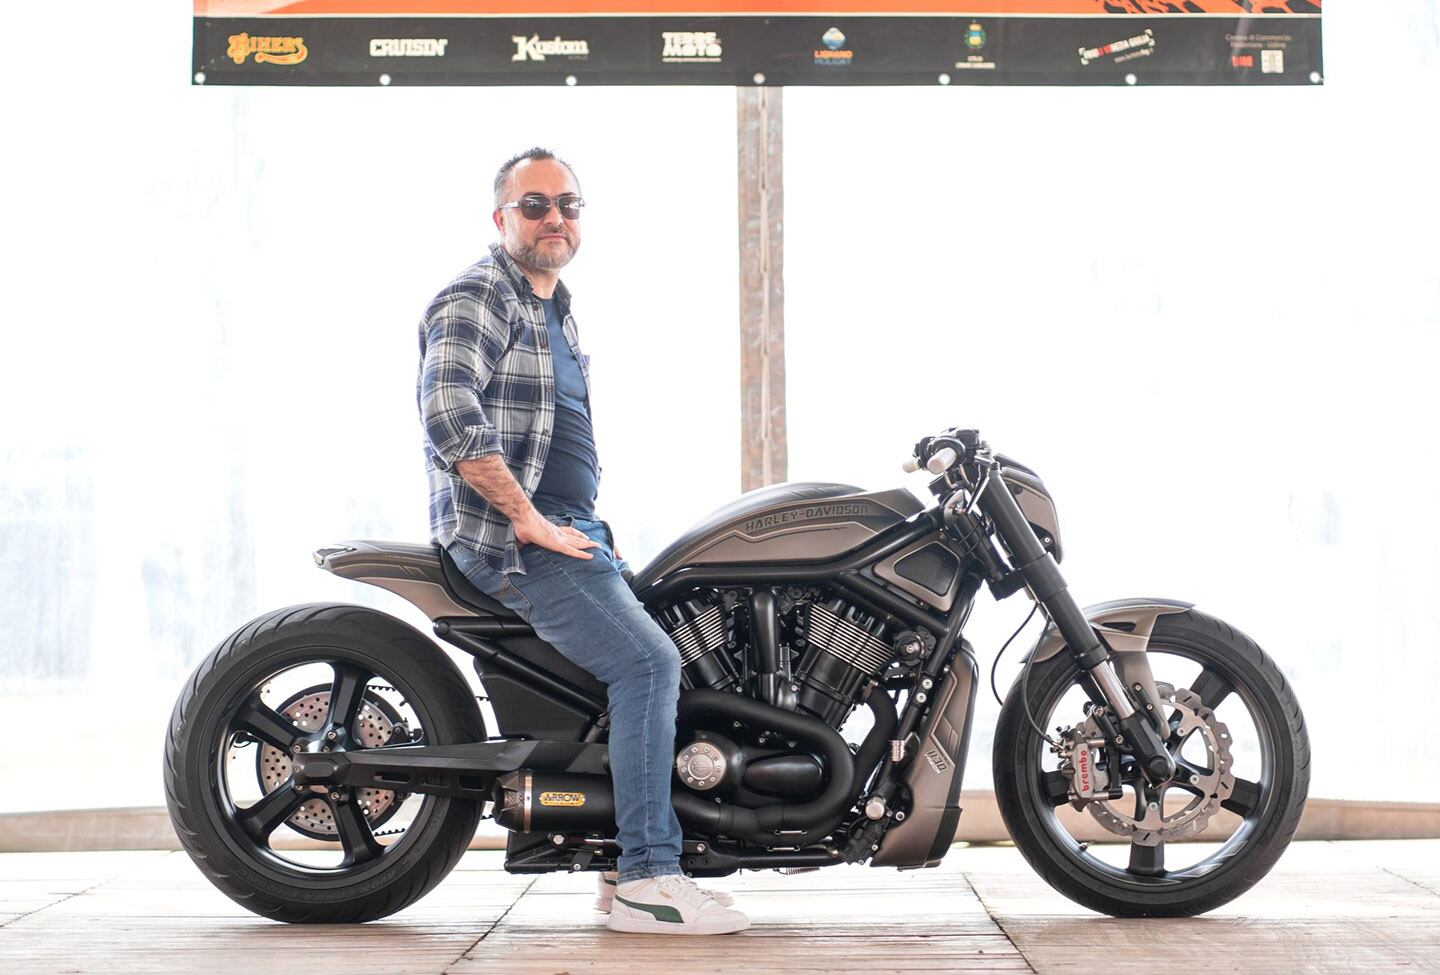 This H-D V-Rod from Kustom Kio rolled away with the top prize in the Modified group.